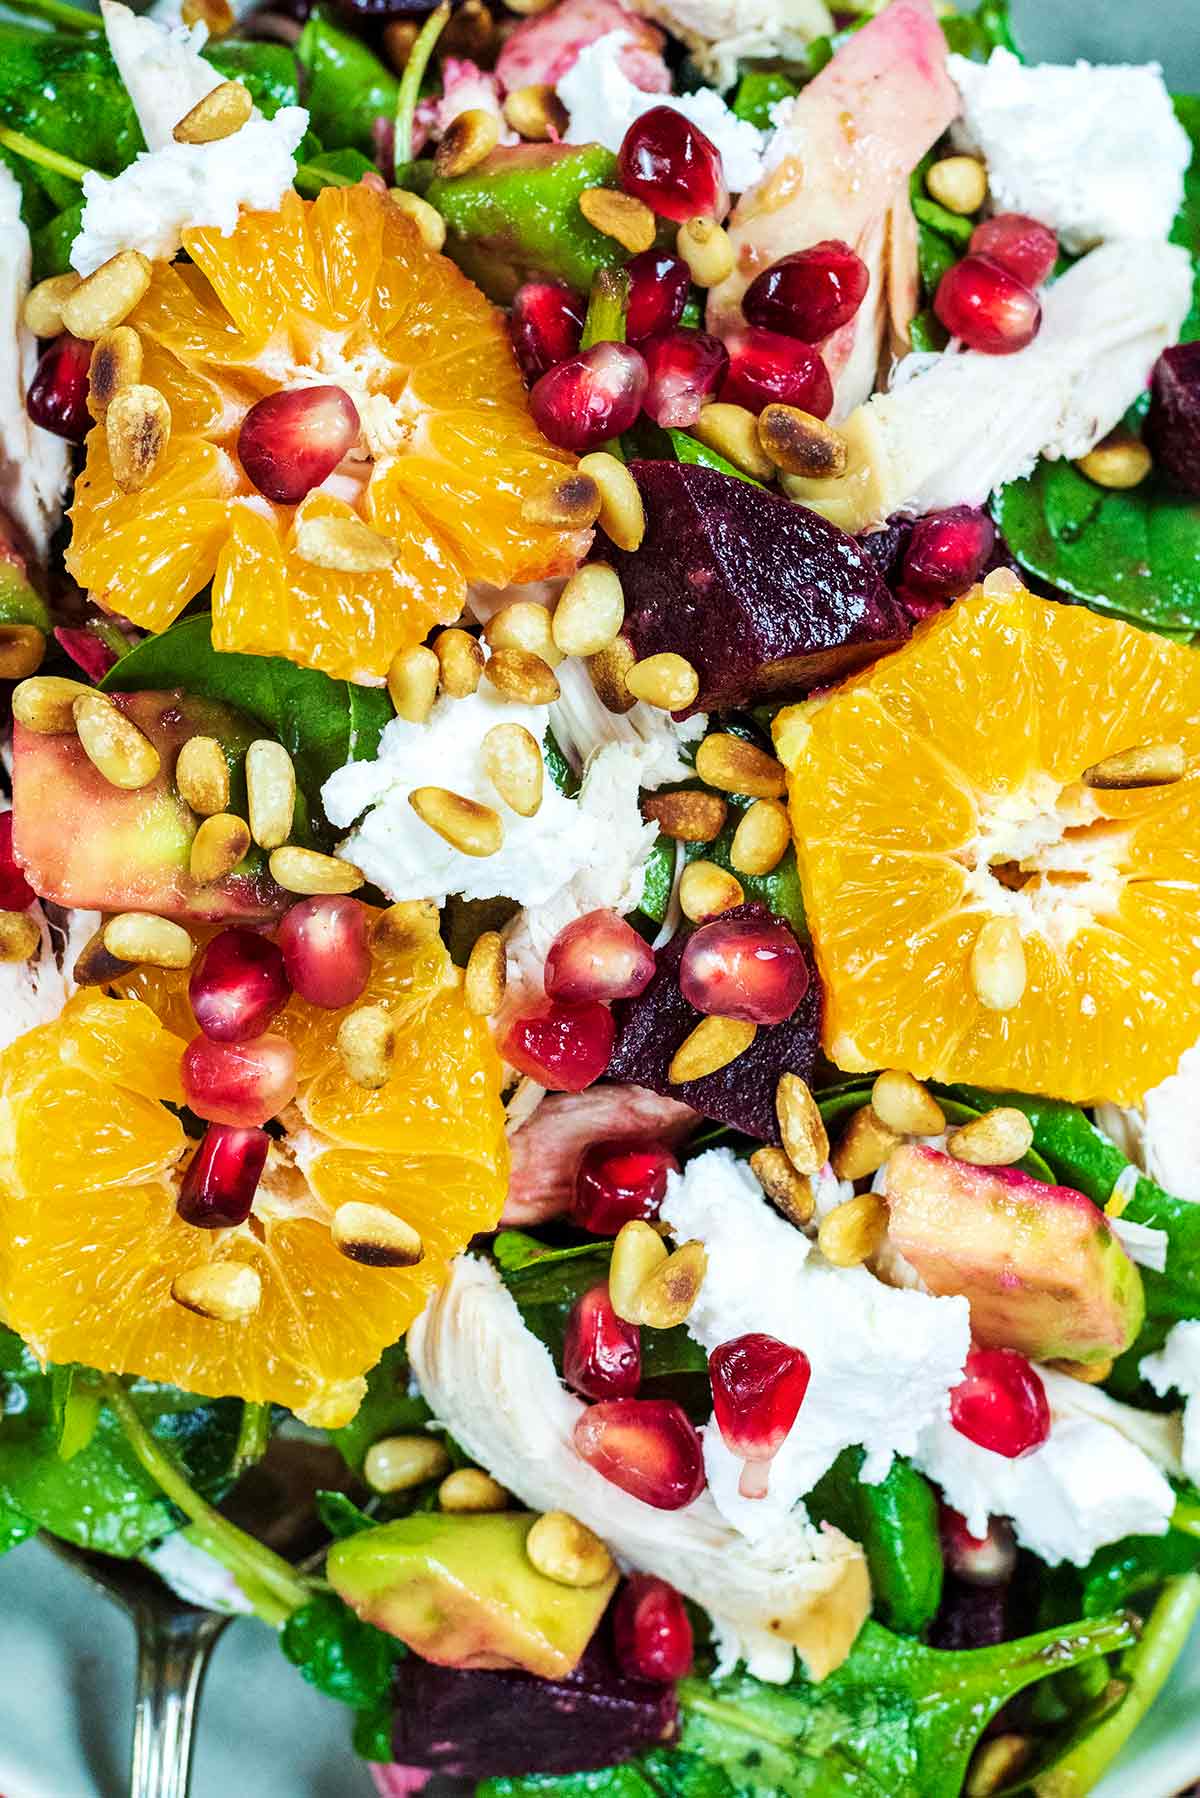 Sliced clementines and pomegranate seeds with goat's cheese and salad leaves.